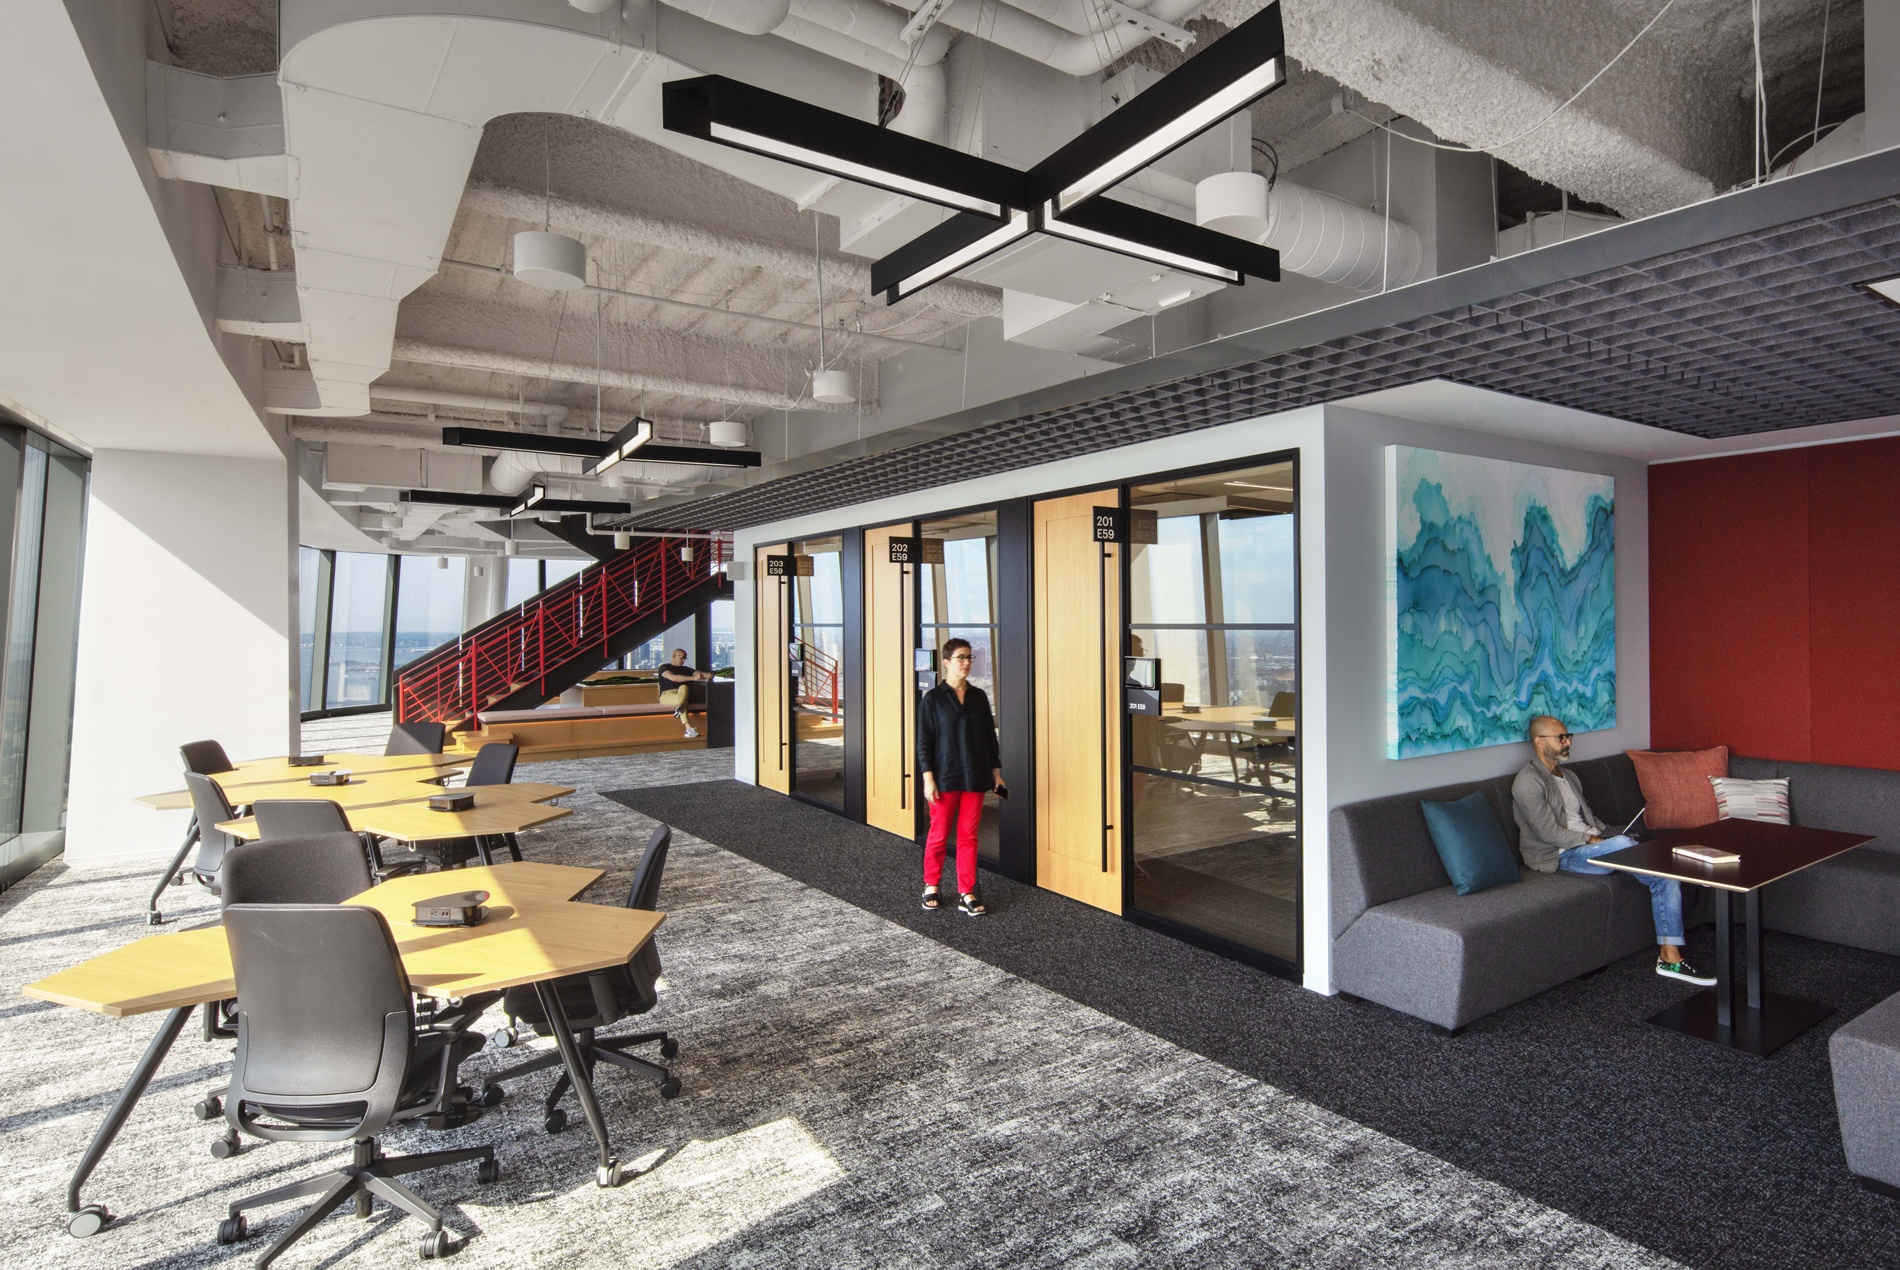 Top 10 office design trends for 2023